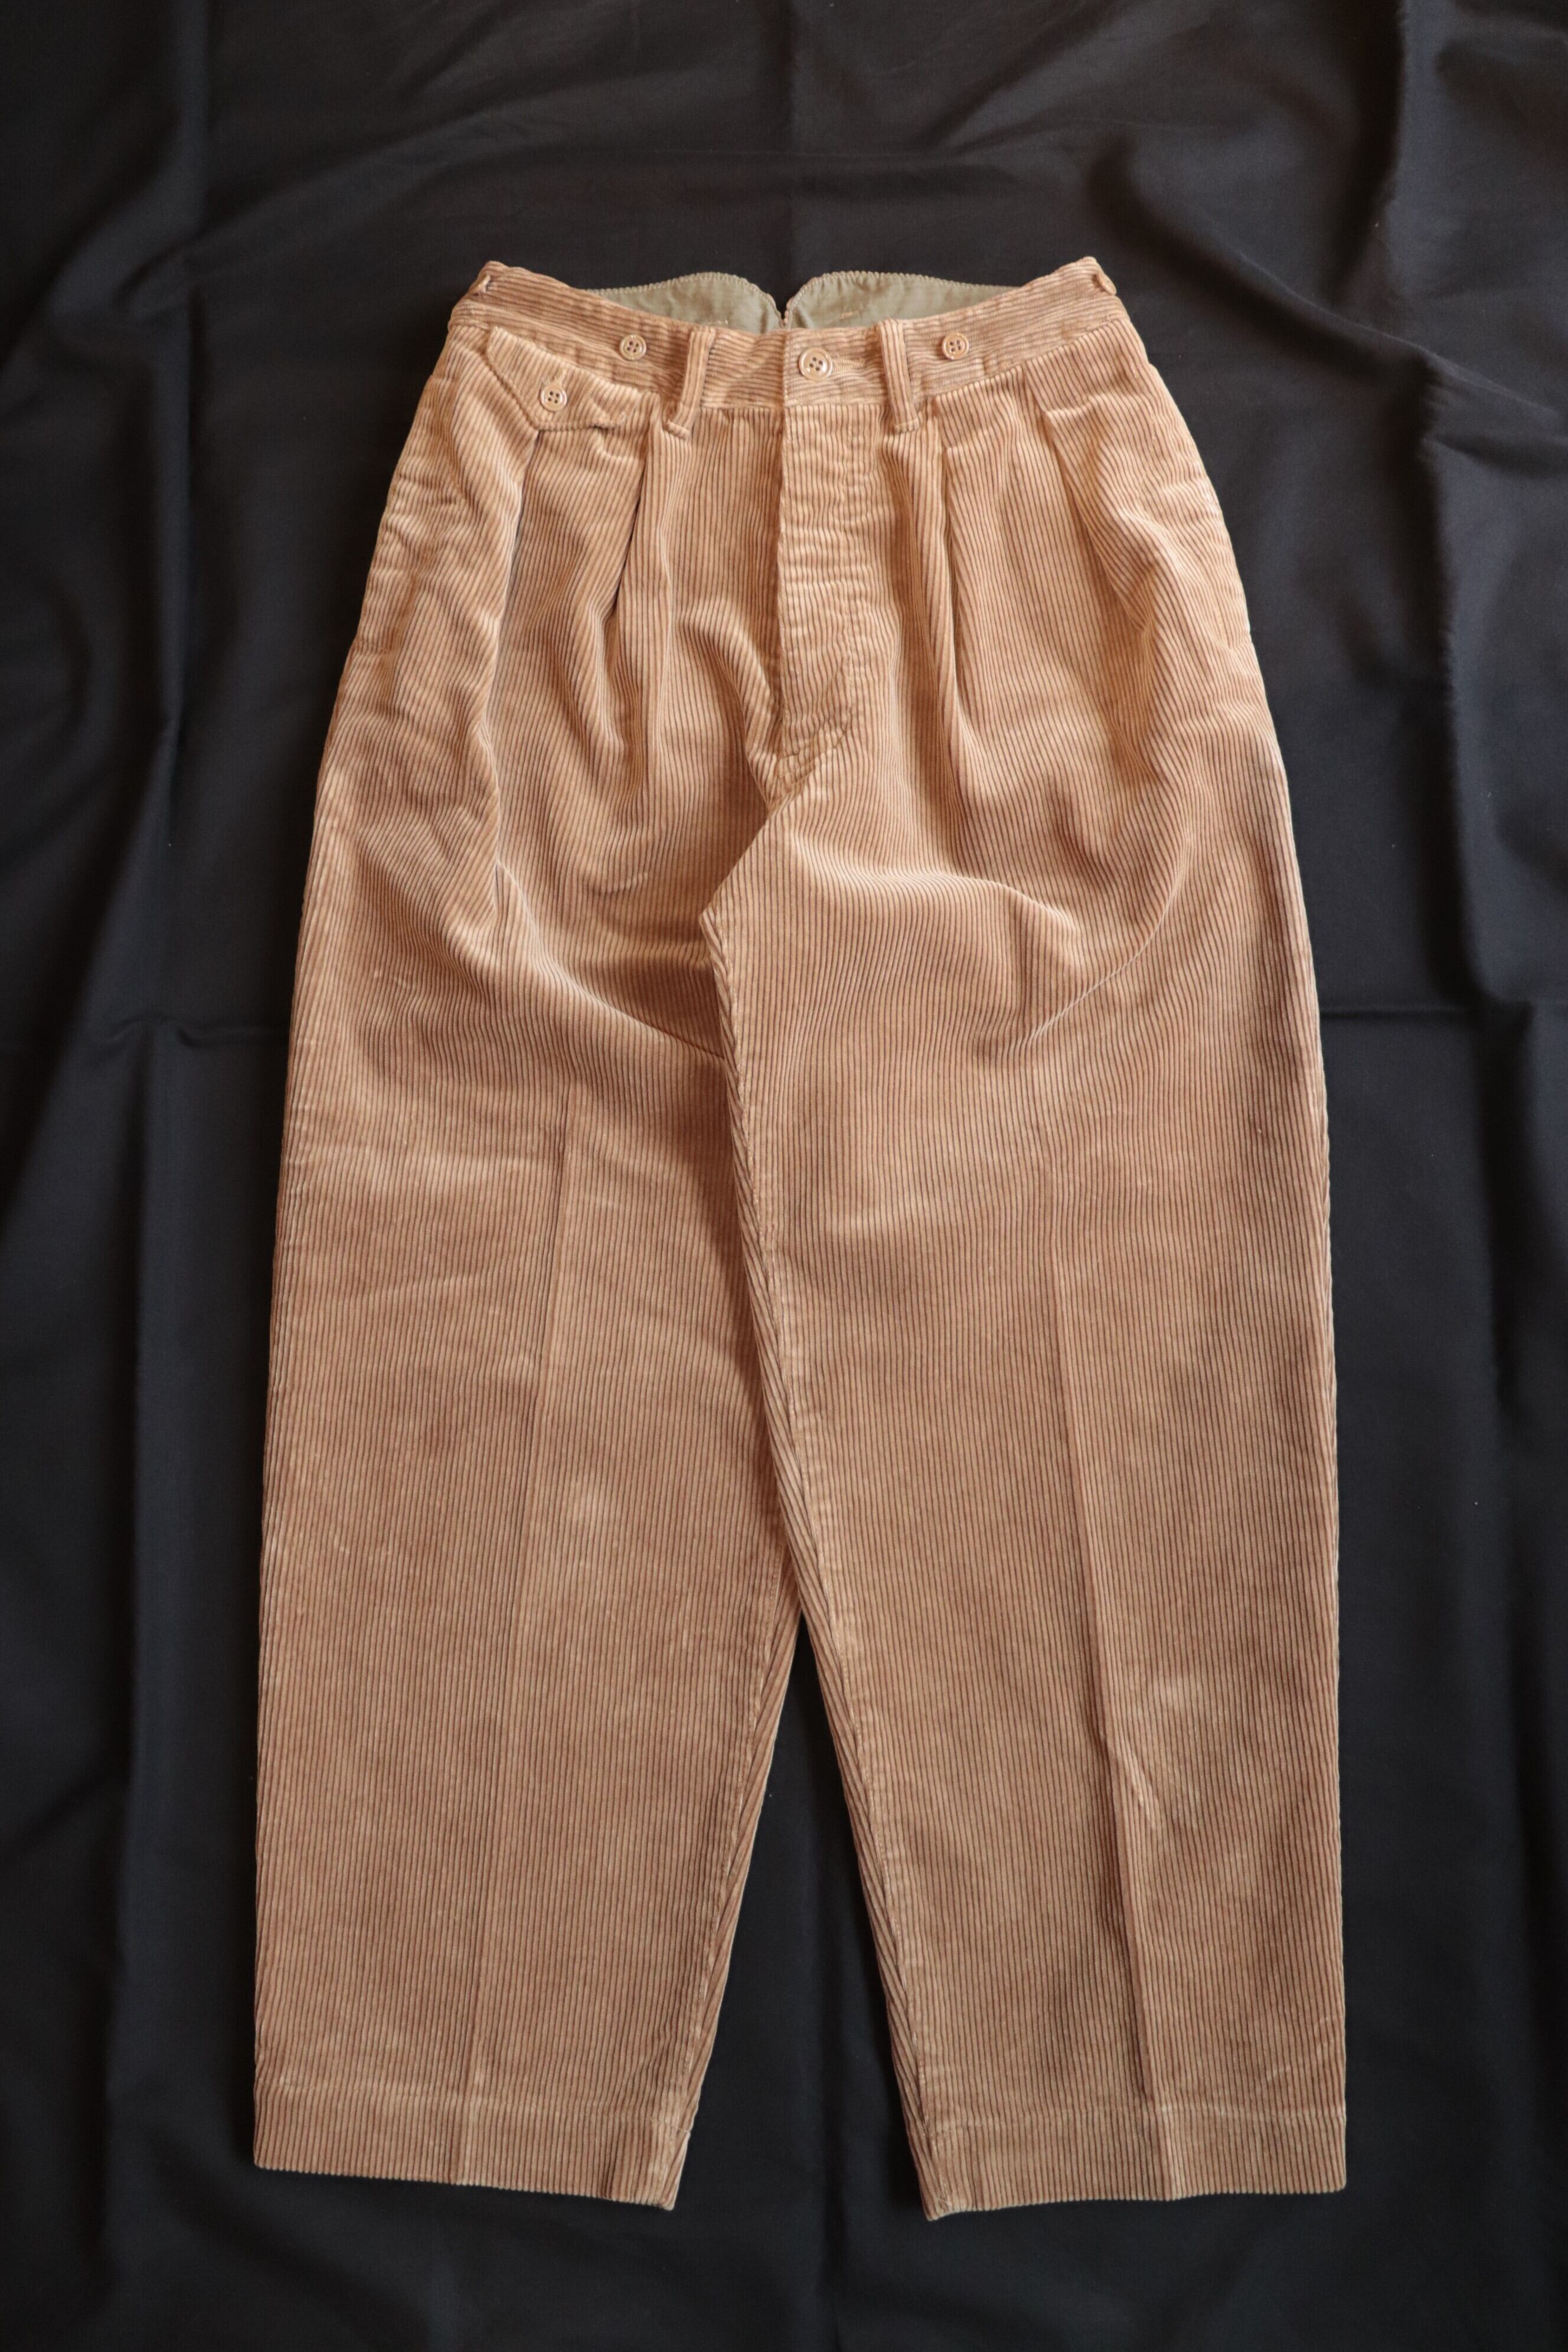 GYPSY&SONS/ジプシーアンドサンズ　CORDUROY TROUSERS　GS2329920